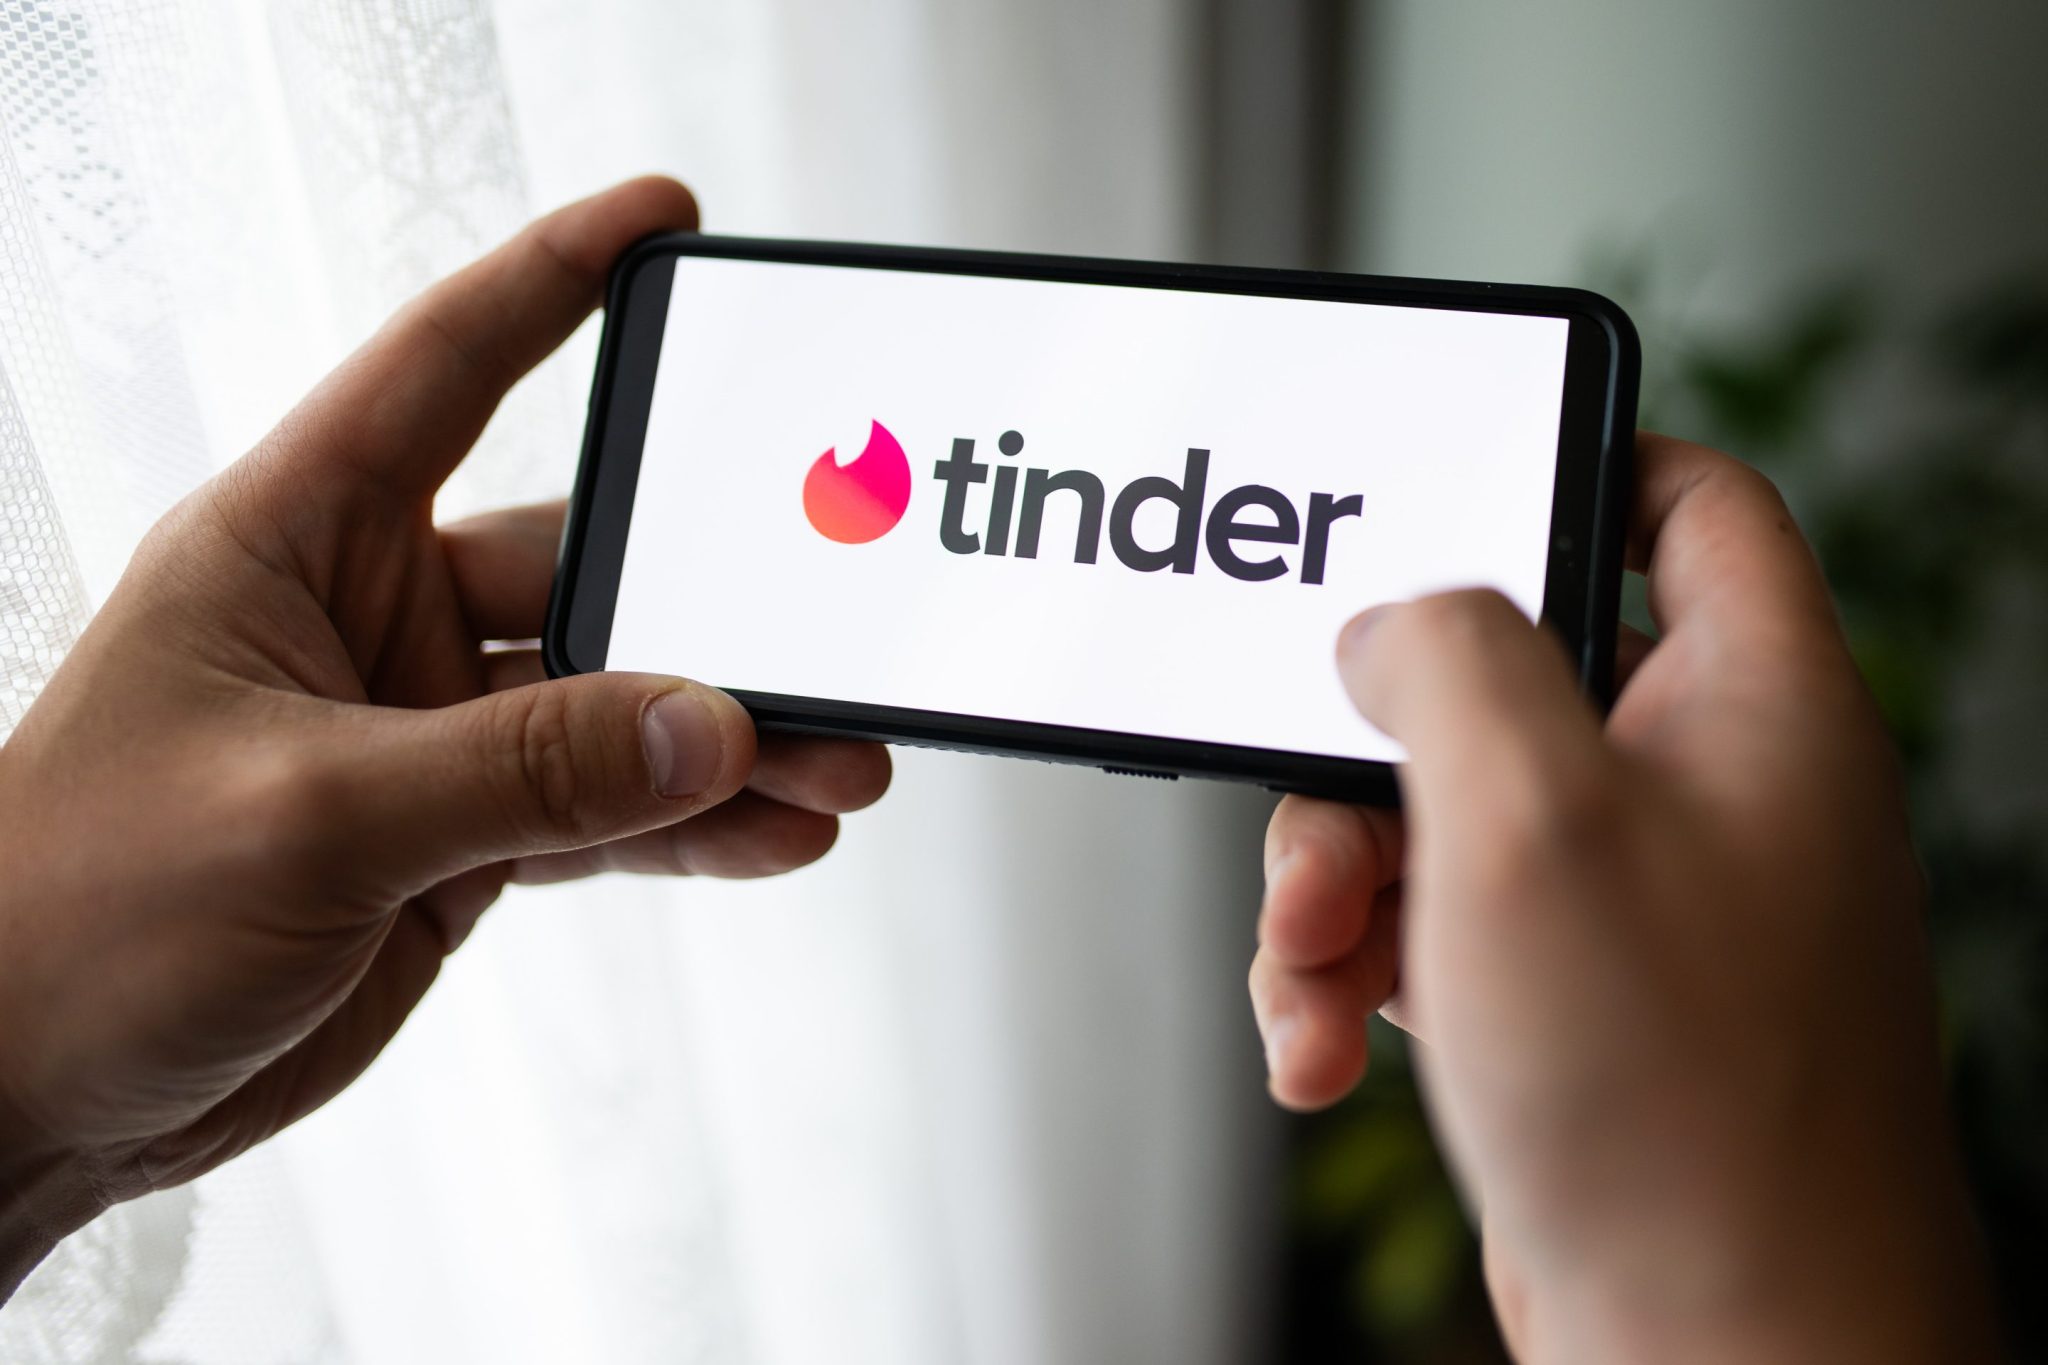 Tinder just added a $500-a-month subscription that gives ultra-daters ‘VIP’ features but still no guarantee of finding love